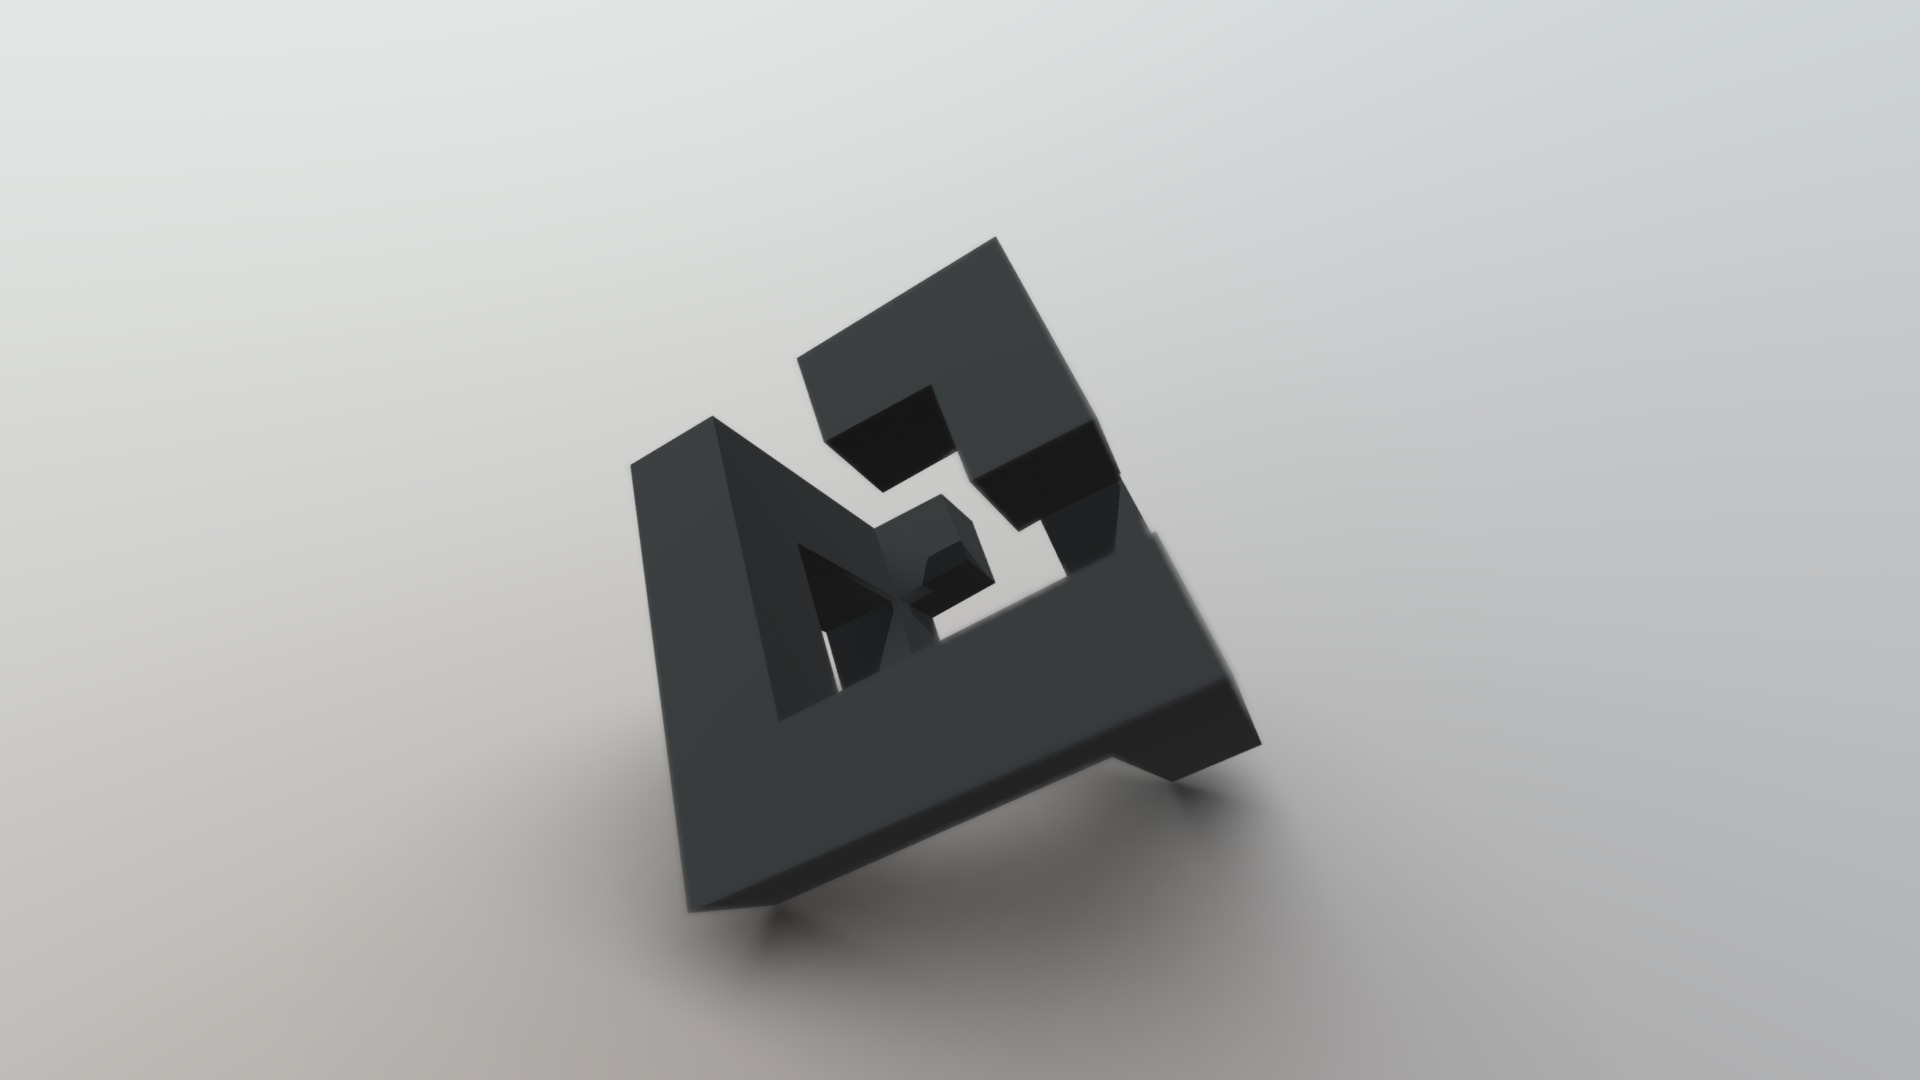 3D model JOSECHO LOPEZ LLORENS - This is a 3D model of the JOSECHO LOPEZ LLORENS. The 3D model is about a cube with a black and white design on it.